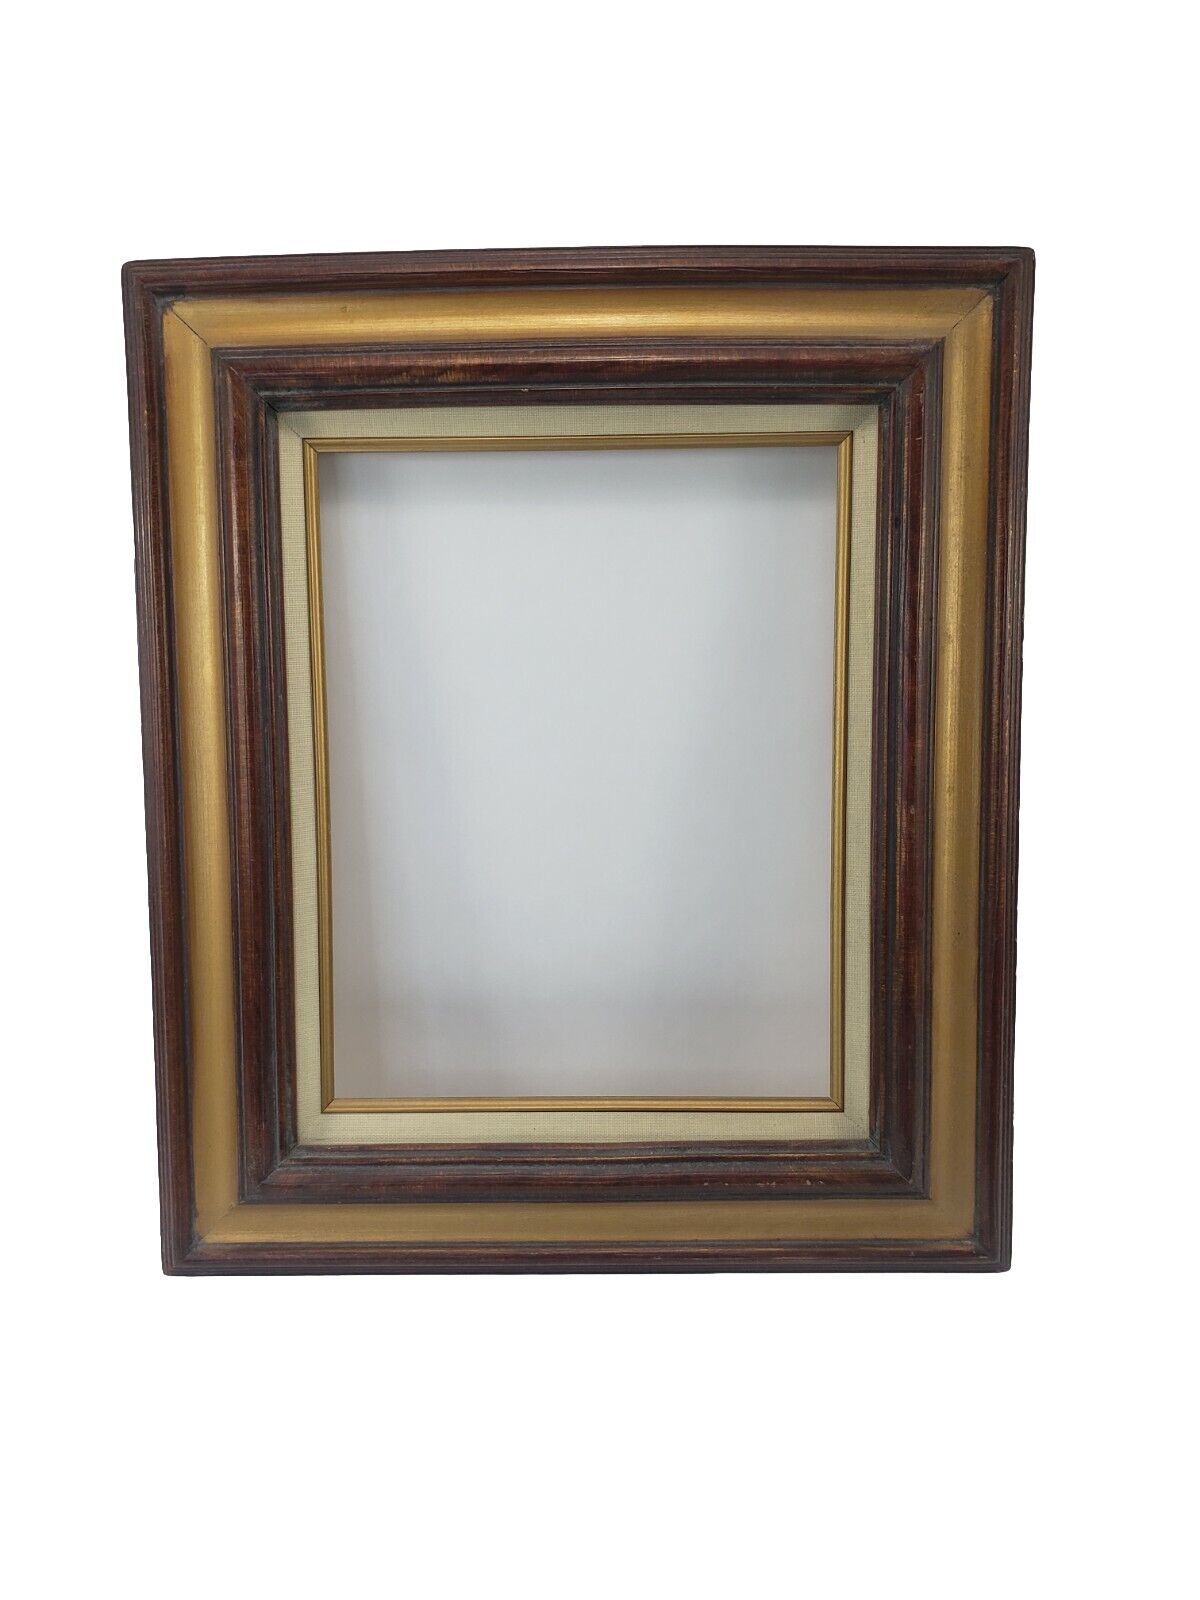 Antique Vitage Wood Victorian Picture Art Frame 13.5x10.5In Overall 21x18 In